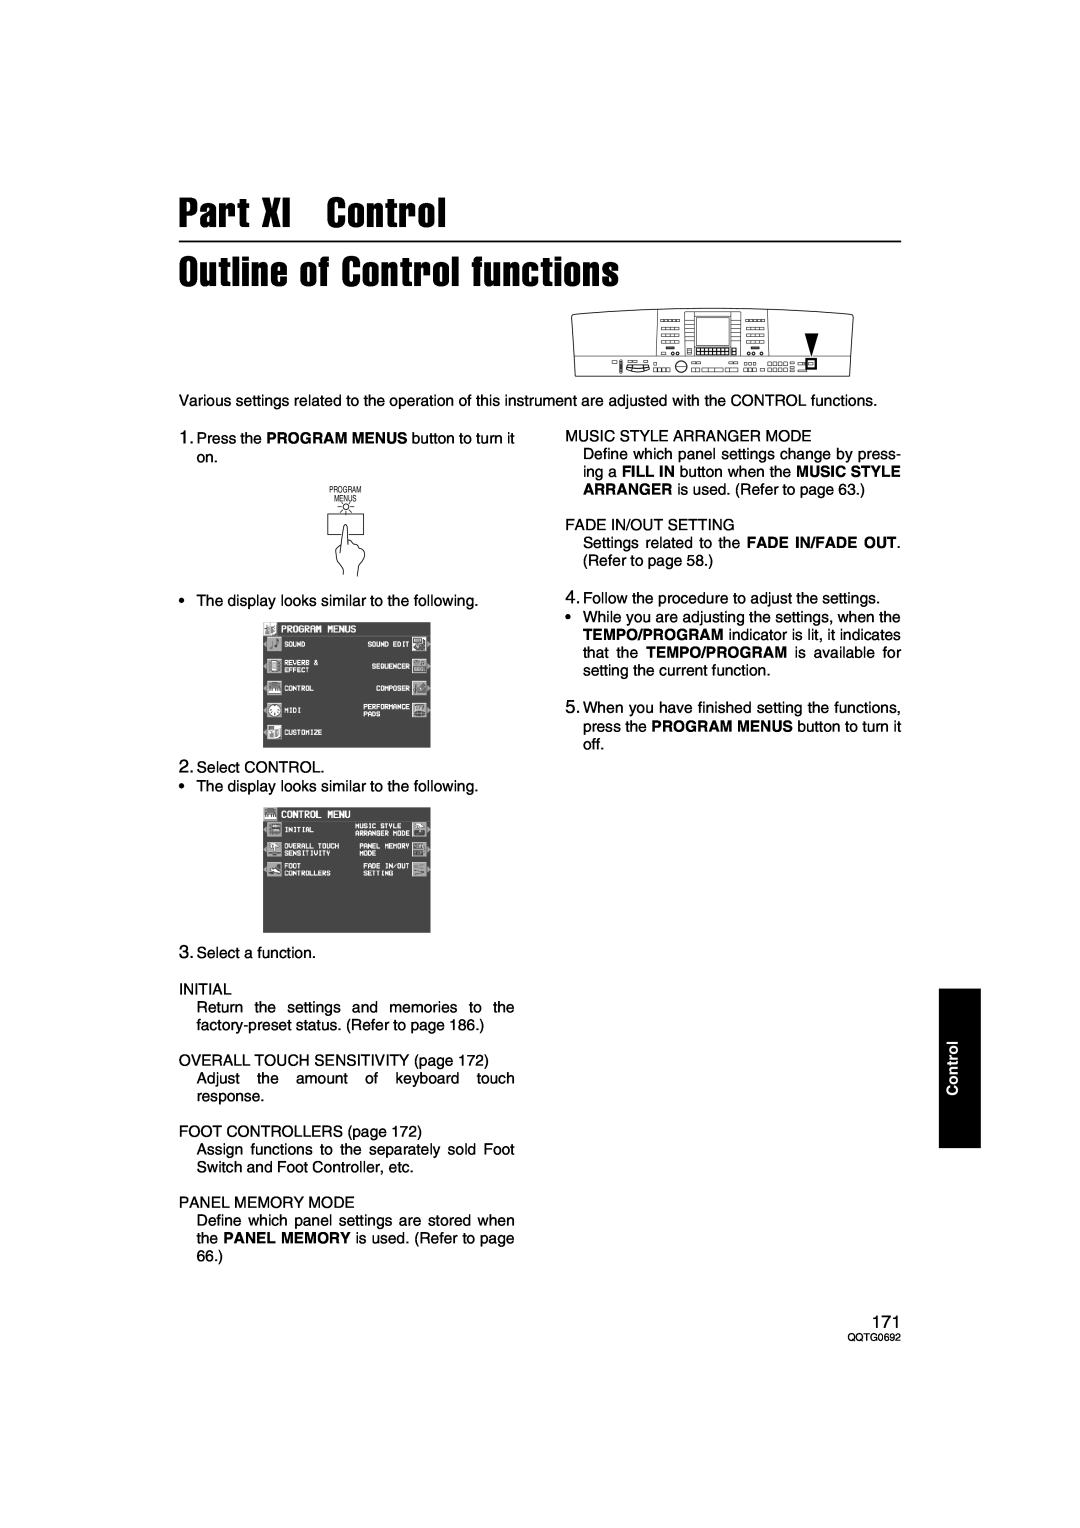 Panasonic SX-KN2400, SX-KN2600 manual Part XI Control Outline of Control functions 